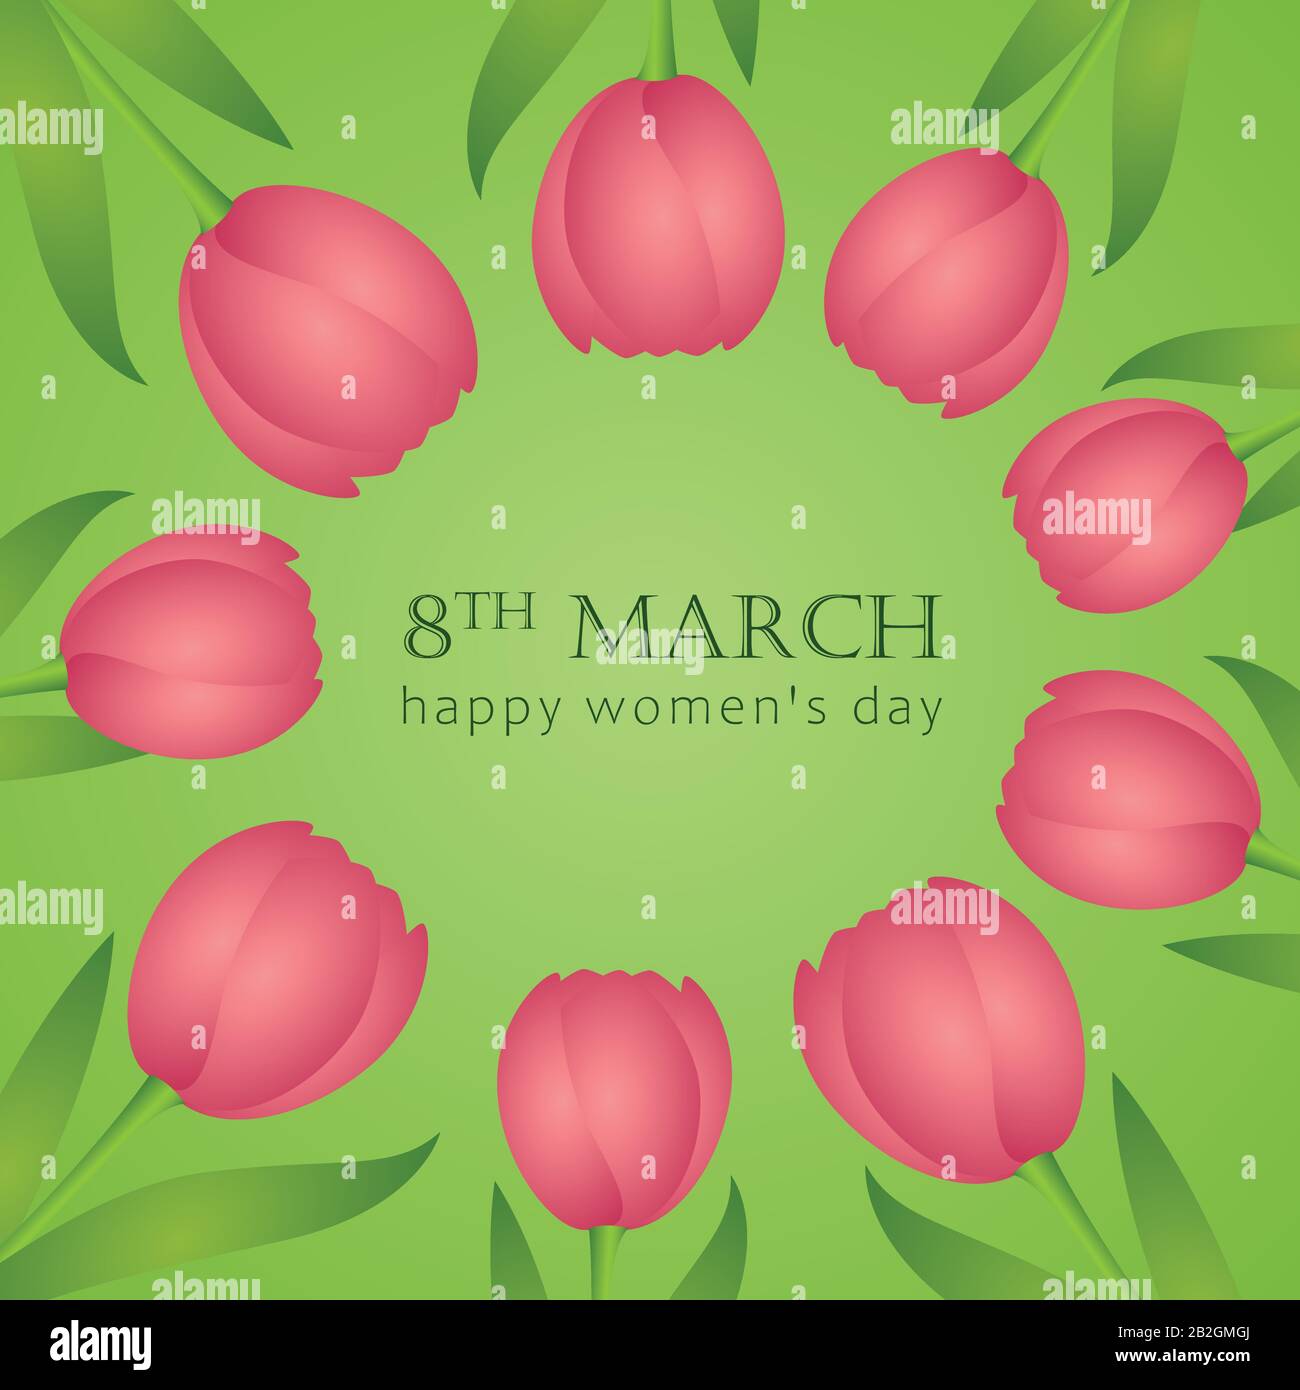 8th march womens day pink tulips circle border greeting card vector illustration EPS10 Stock Vector